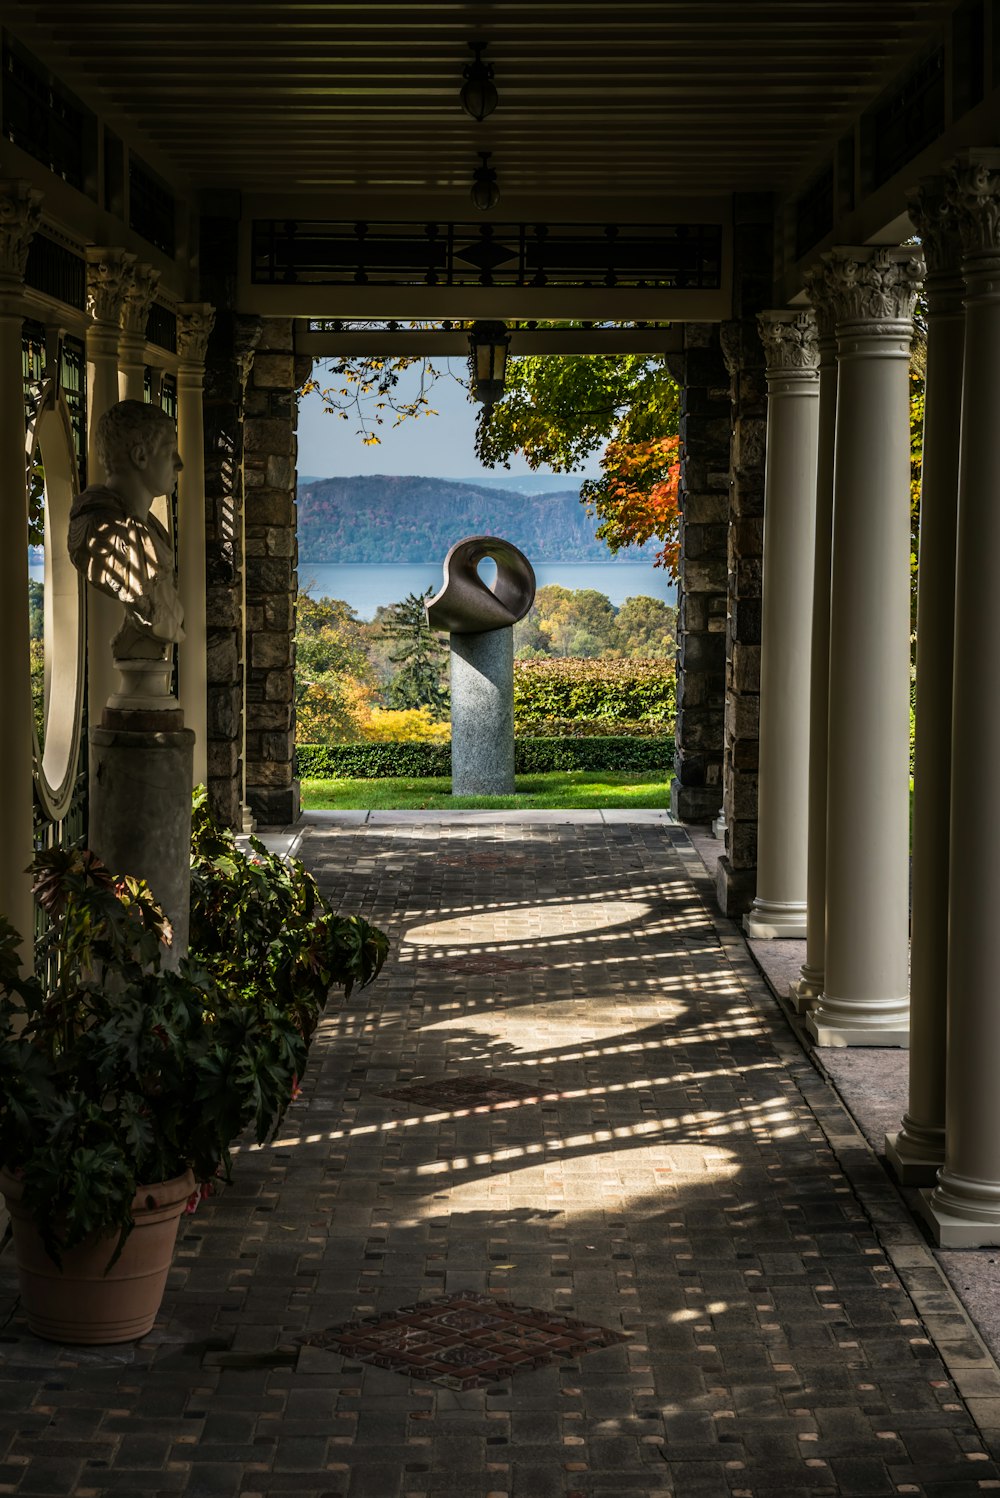 a view of a walkway with a sculpture in the background